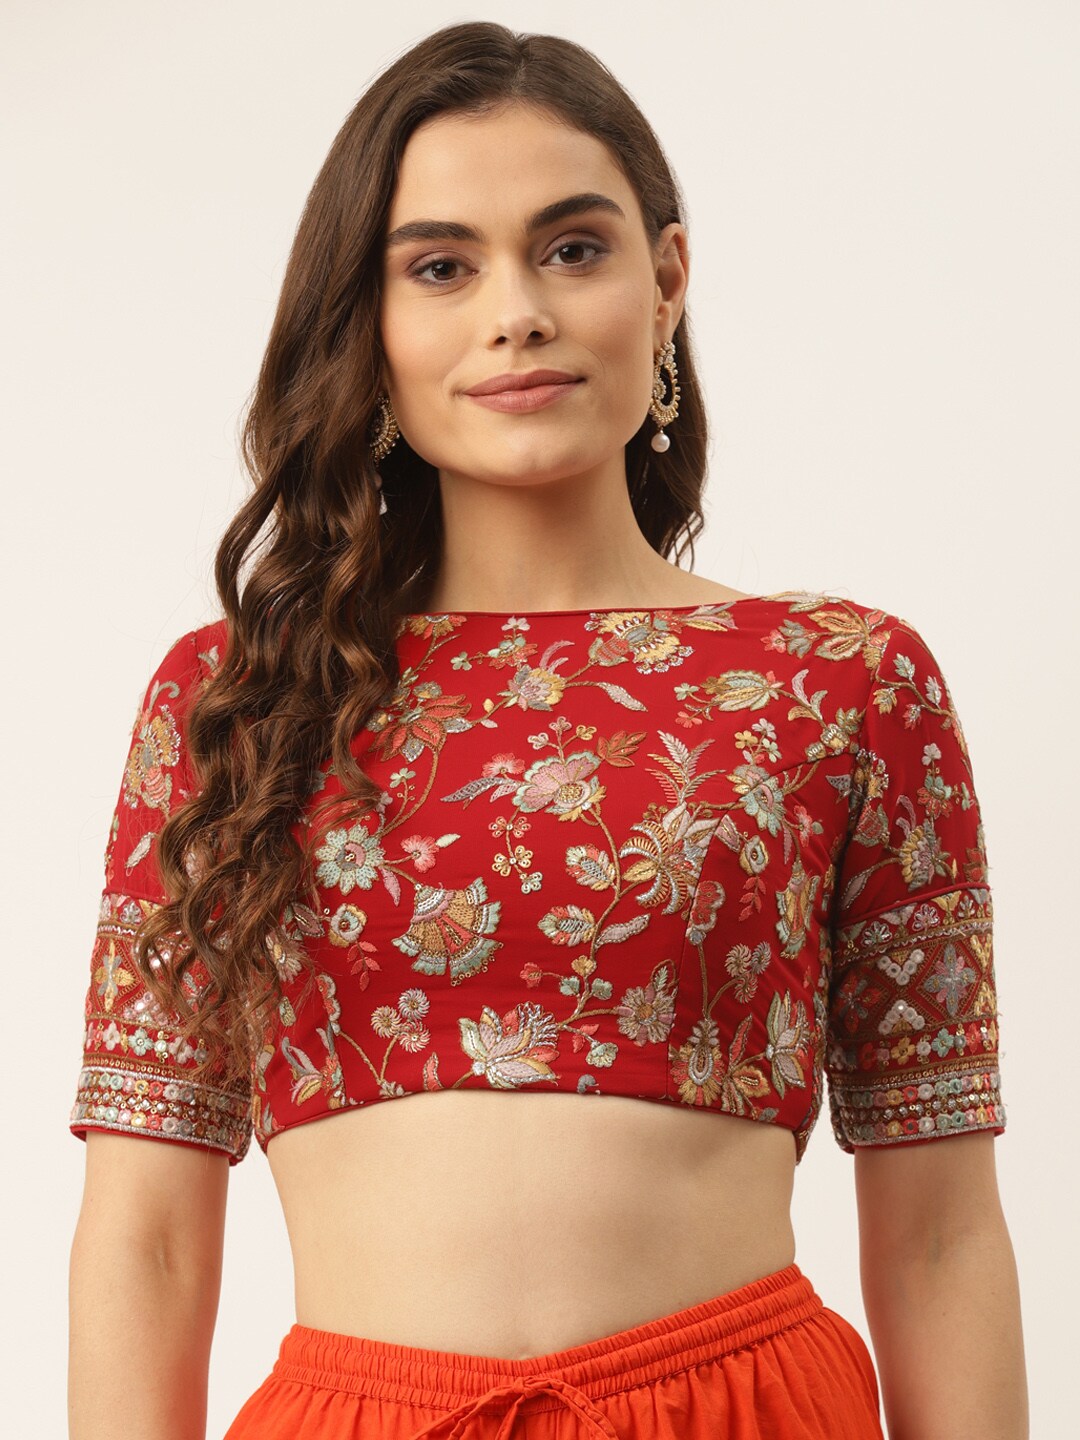 NDS Niharikaa Designer Studio Women Red Ethnic Motif Embroidered Padded Blouse Price in India